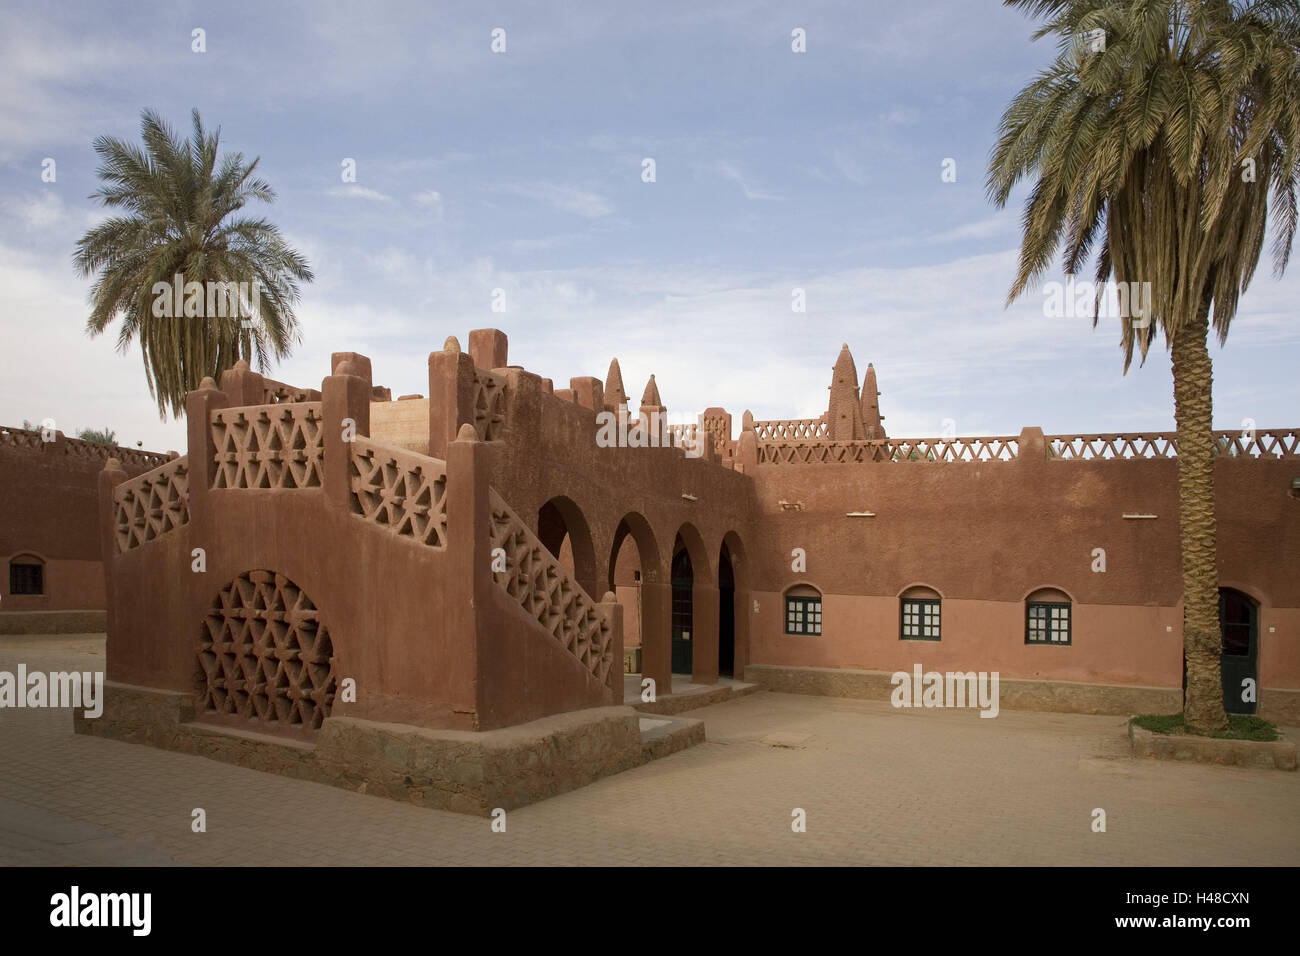 Algeria, Timimoun, hotel L'Oasis blusher, Africa, North, Africa, destination, tourism, building, architecture, hotel building, closed, Sudanese, mucky architecture, mucky construction method, outside, deserted, palms, Stock Photo